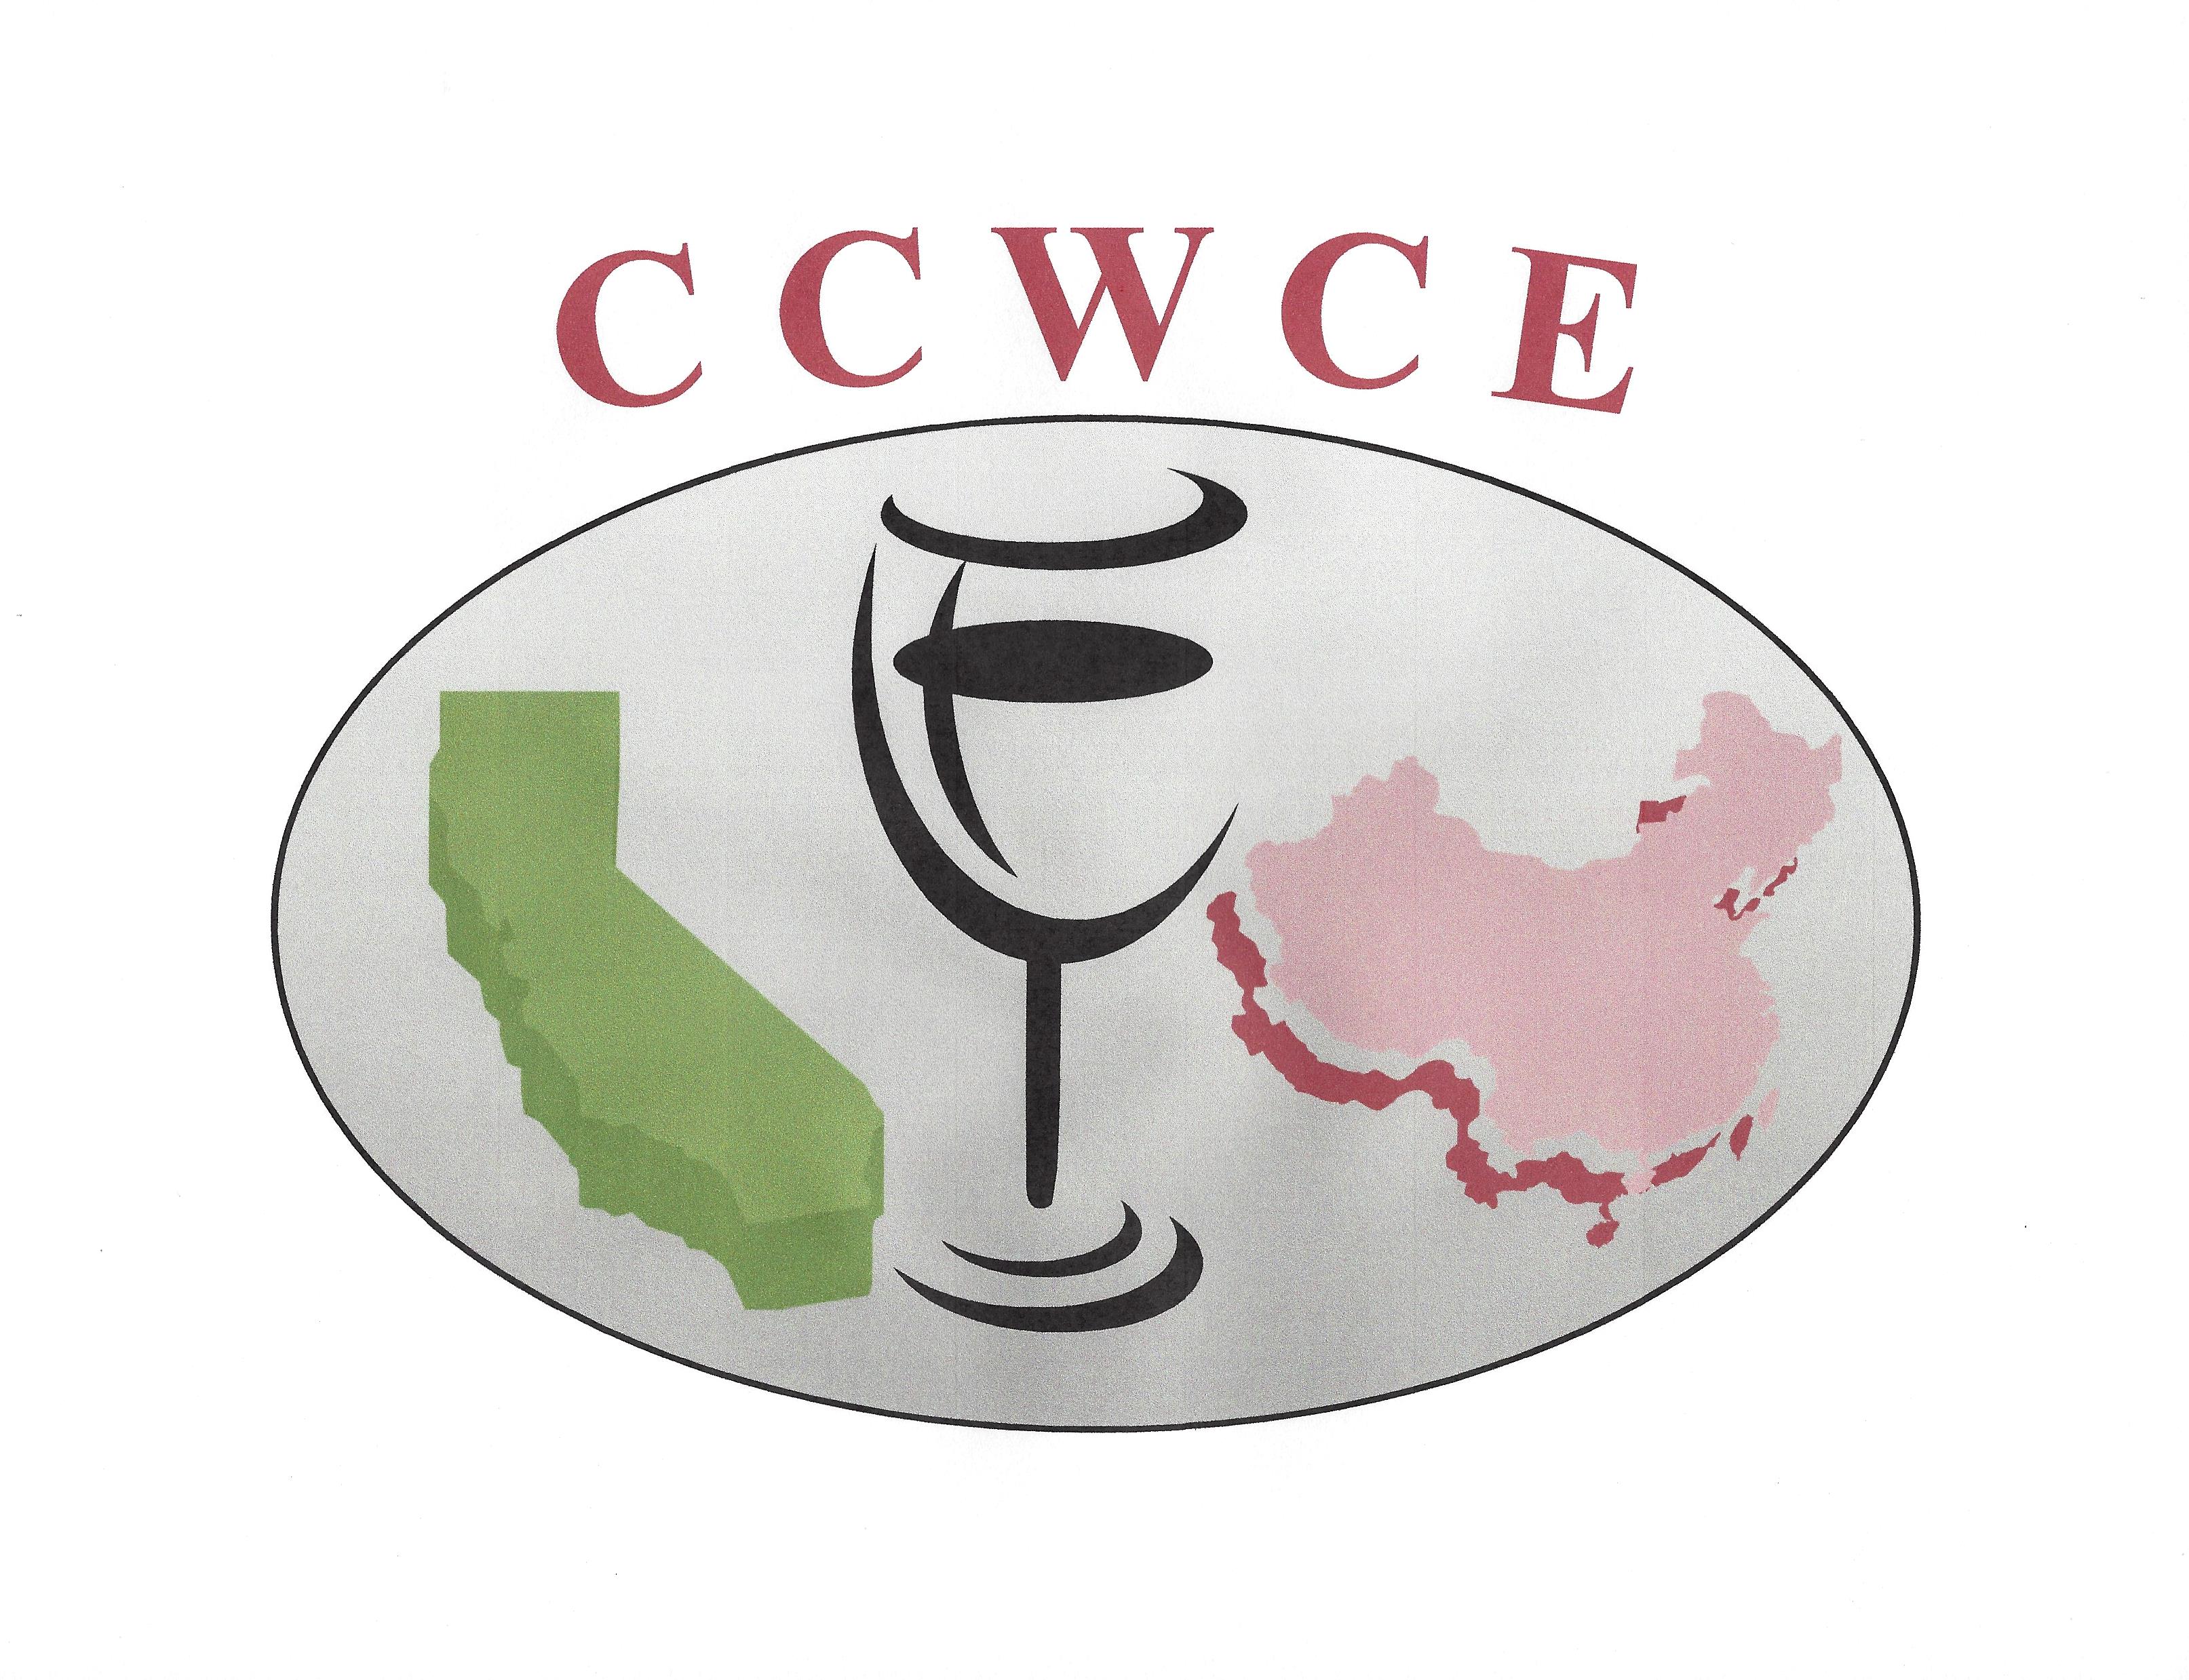 Cal-China Wine Cultural Exchange (CCWCE)